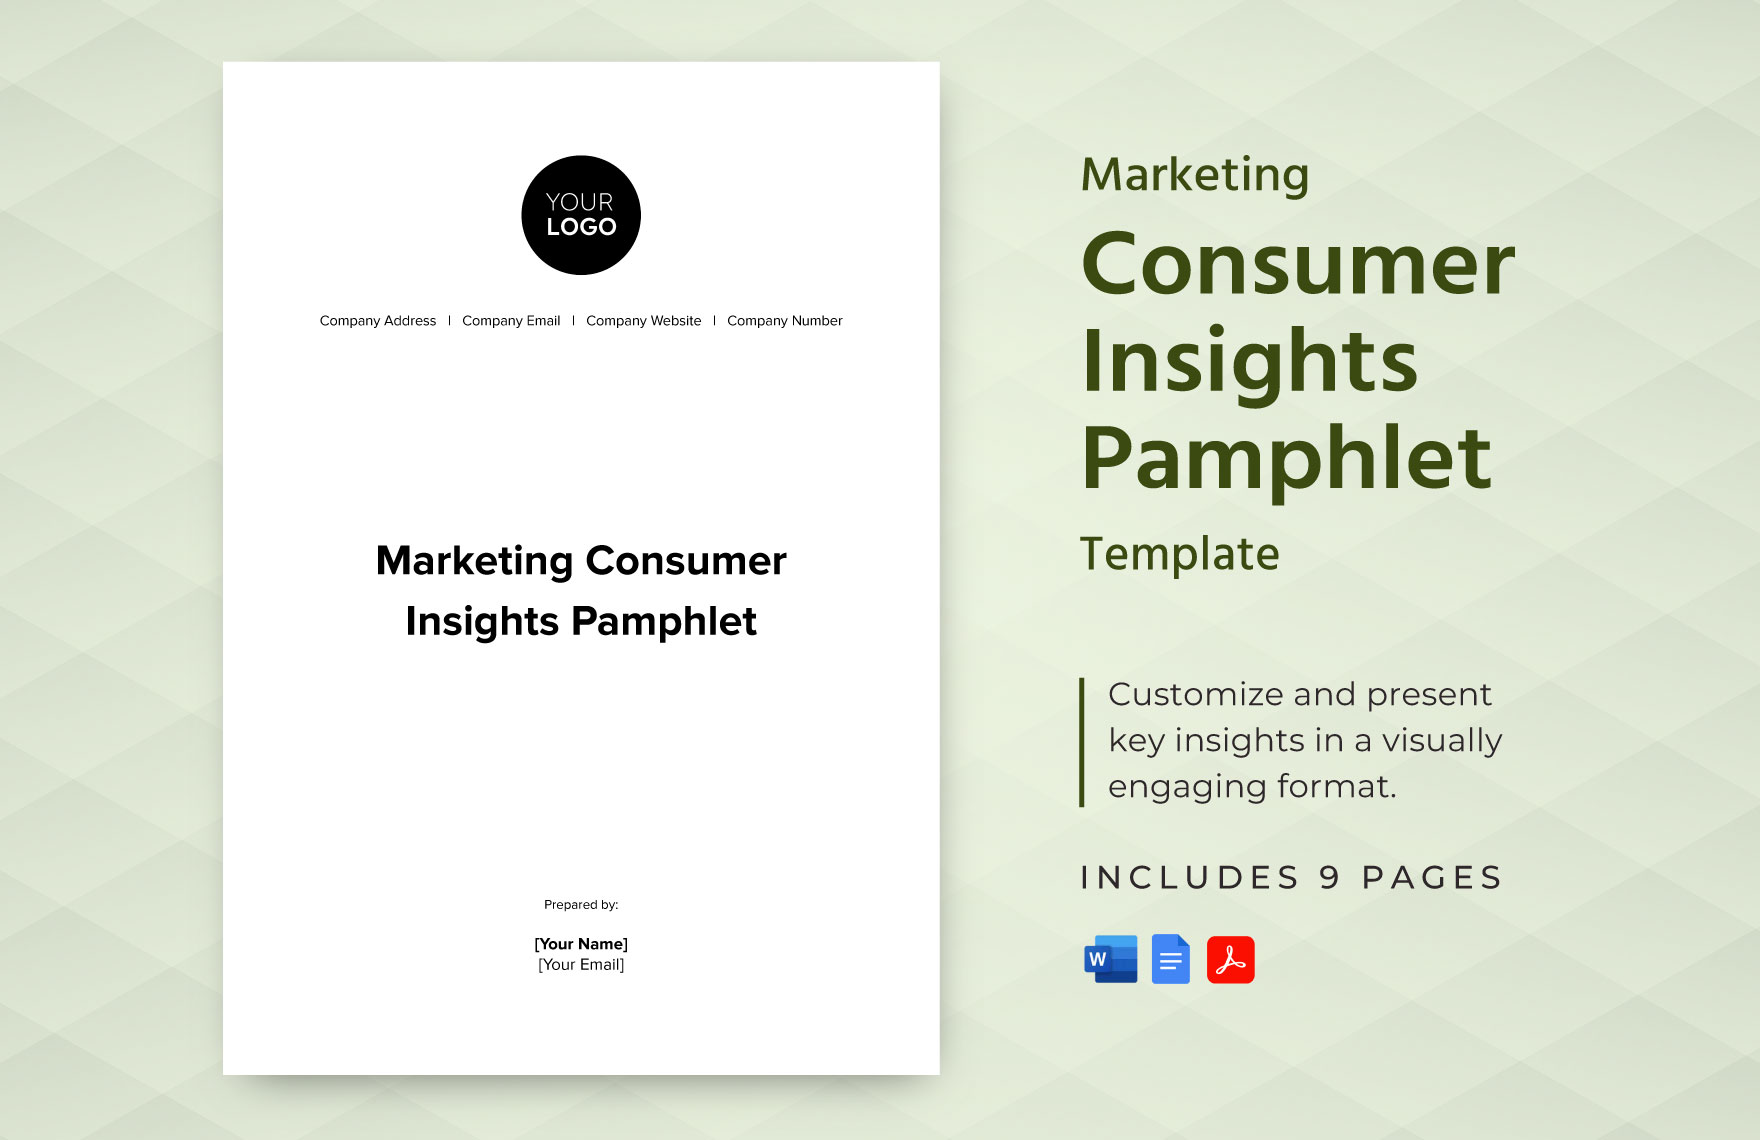 Marketing Consumer Insights Pamphlet Template